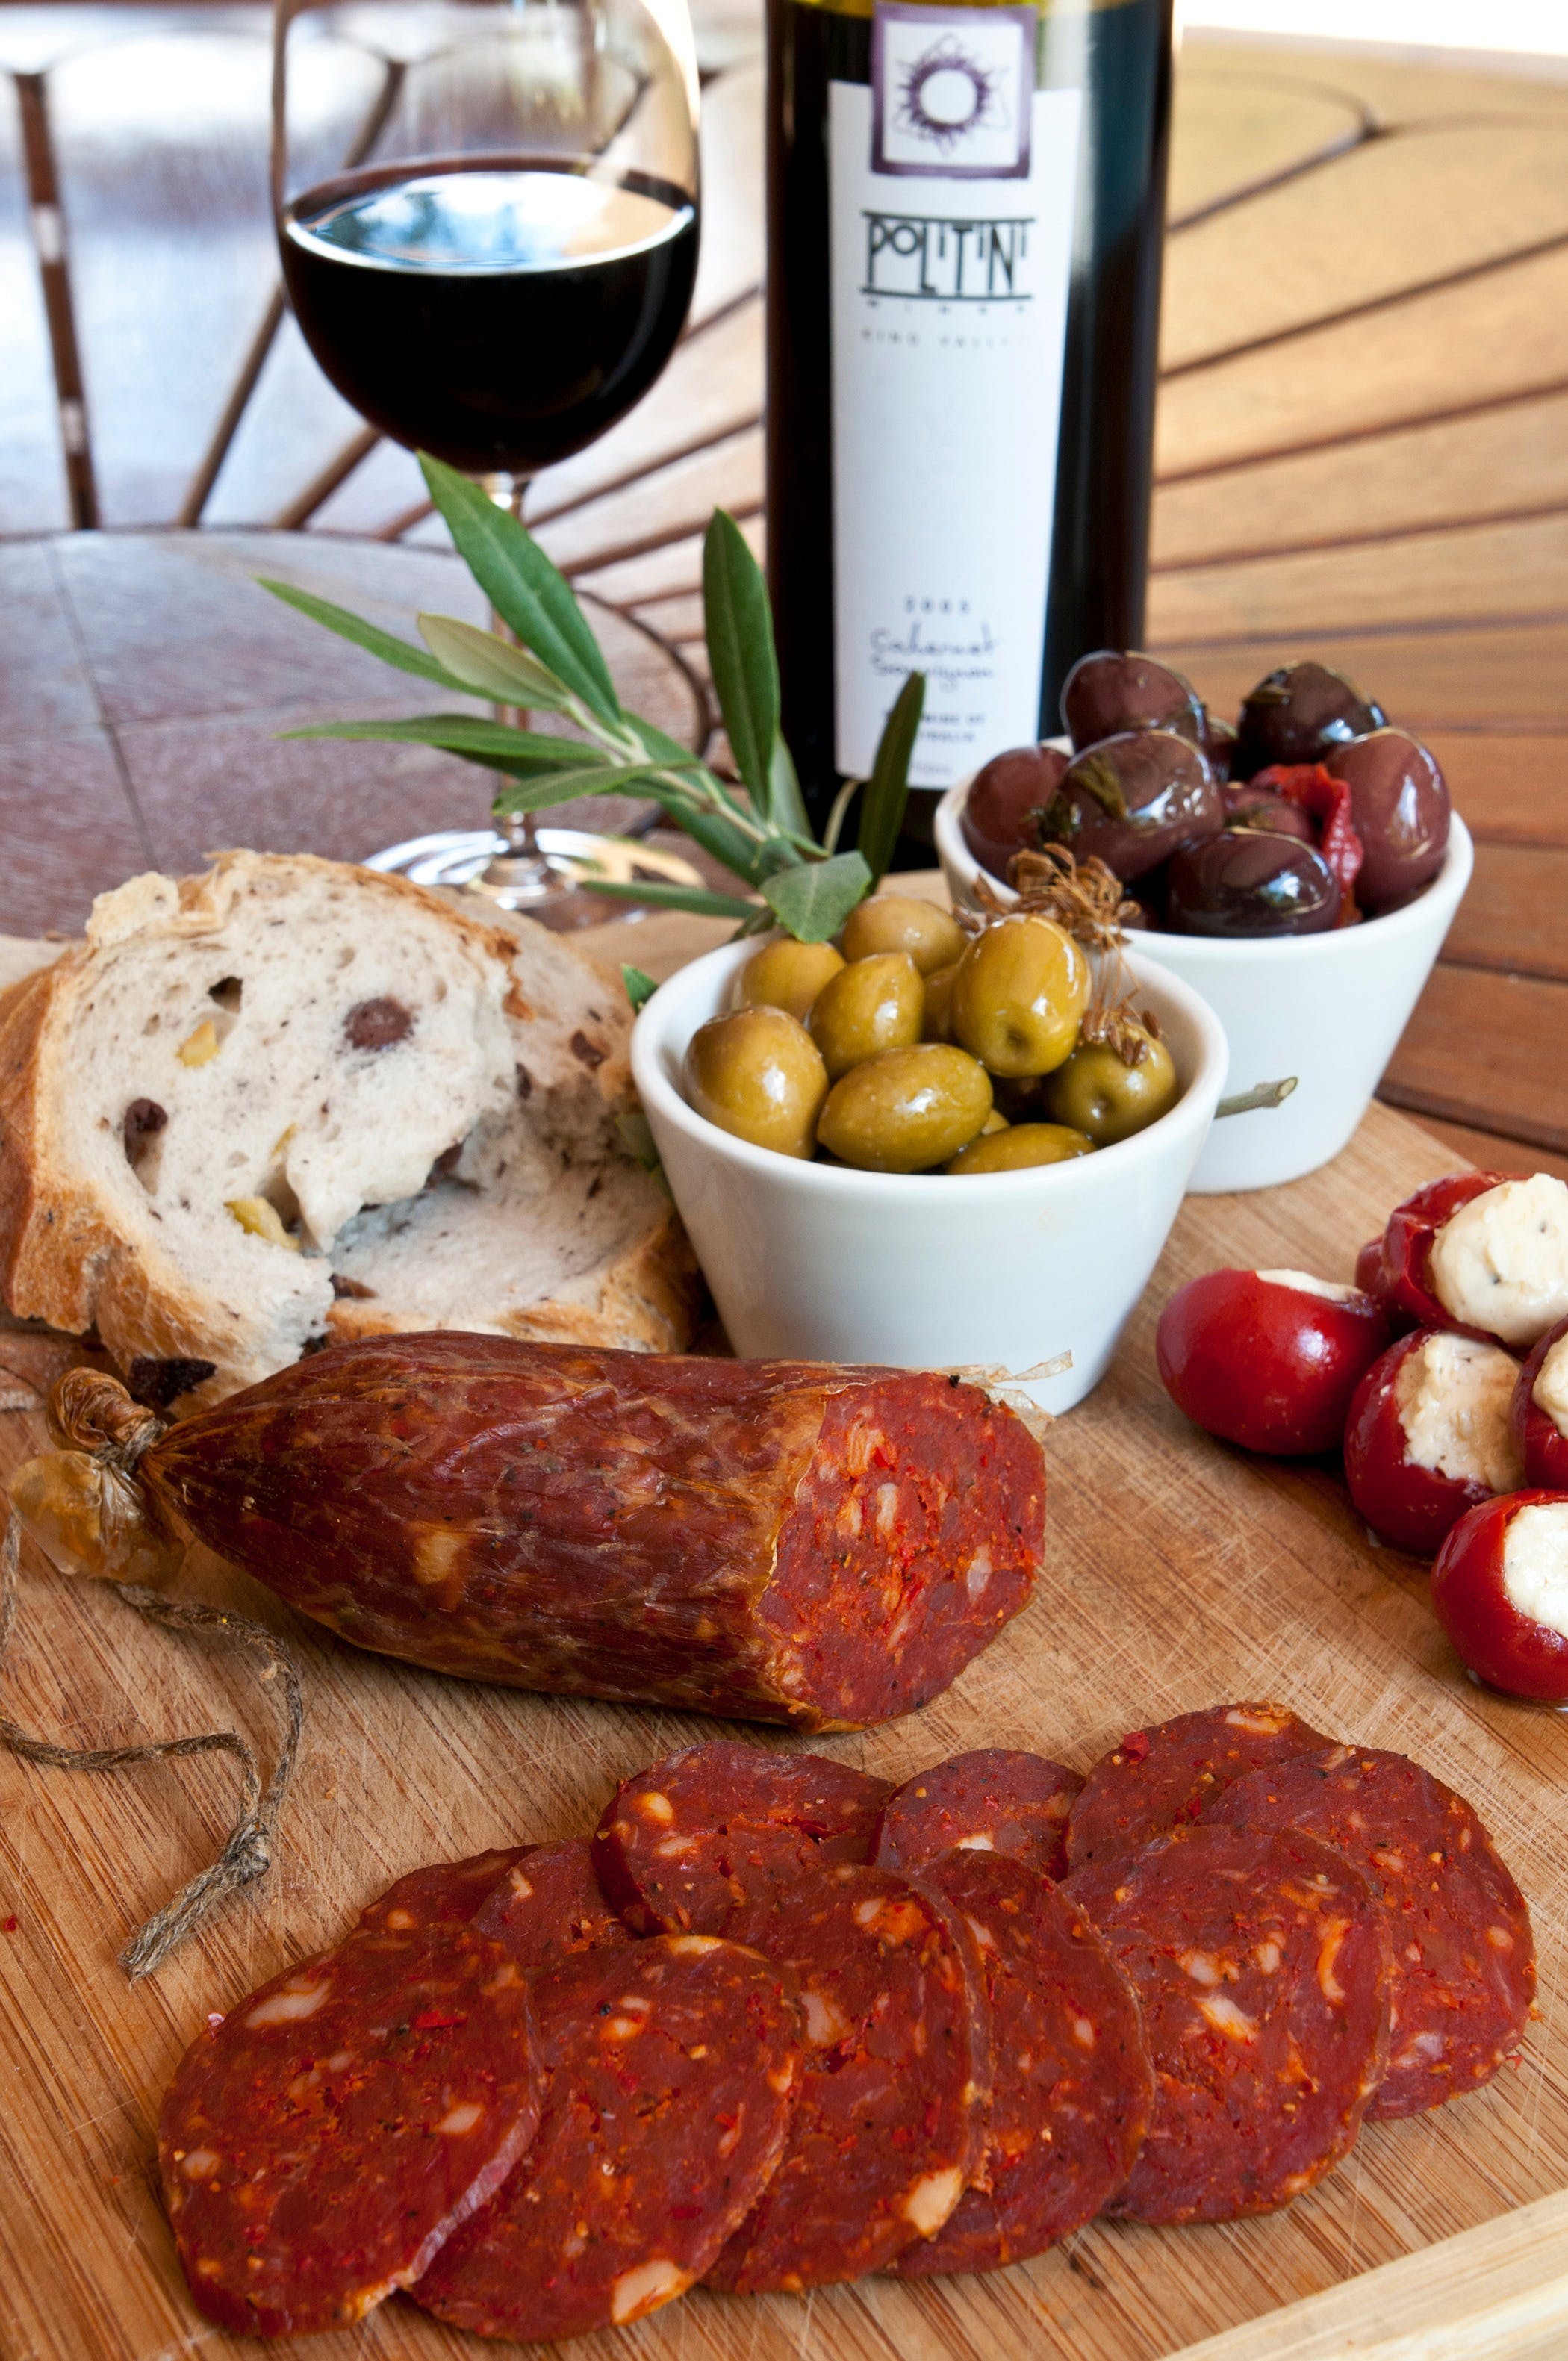 Salami and Salsicce Making classes at Politini Wines - St Kilda Accommodation